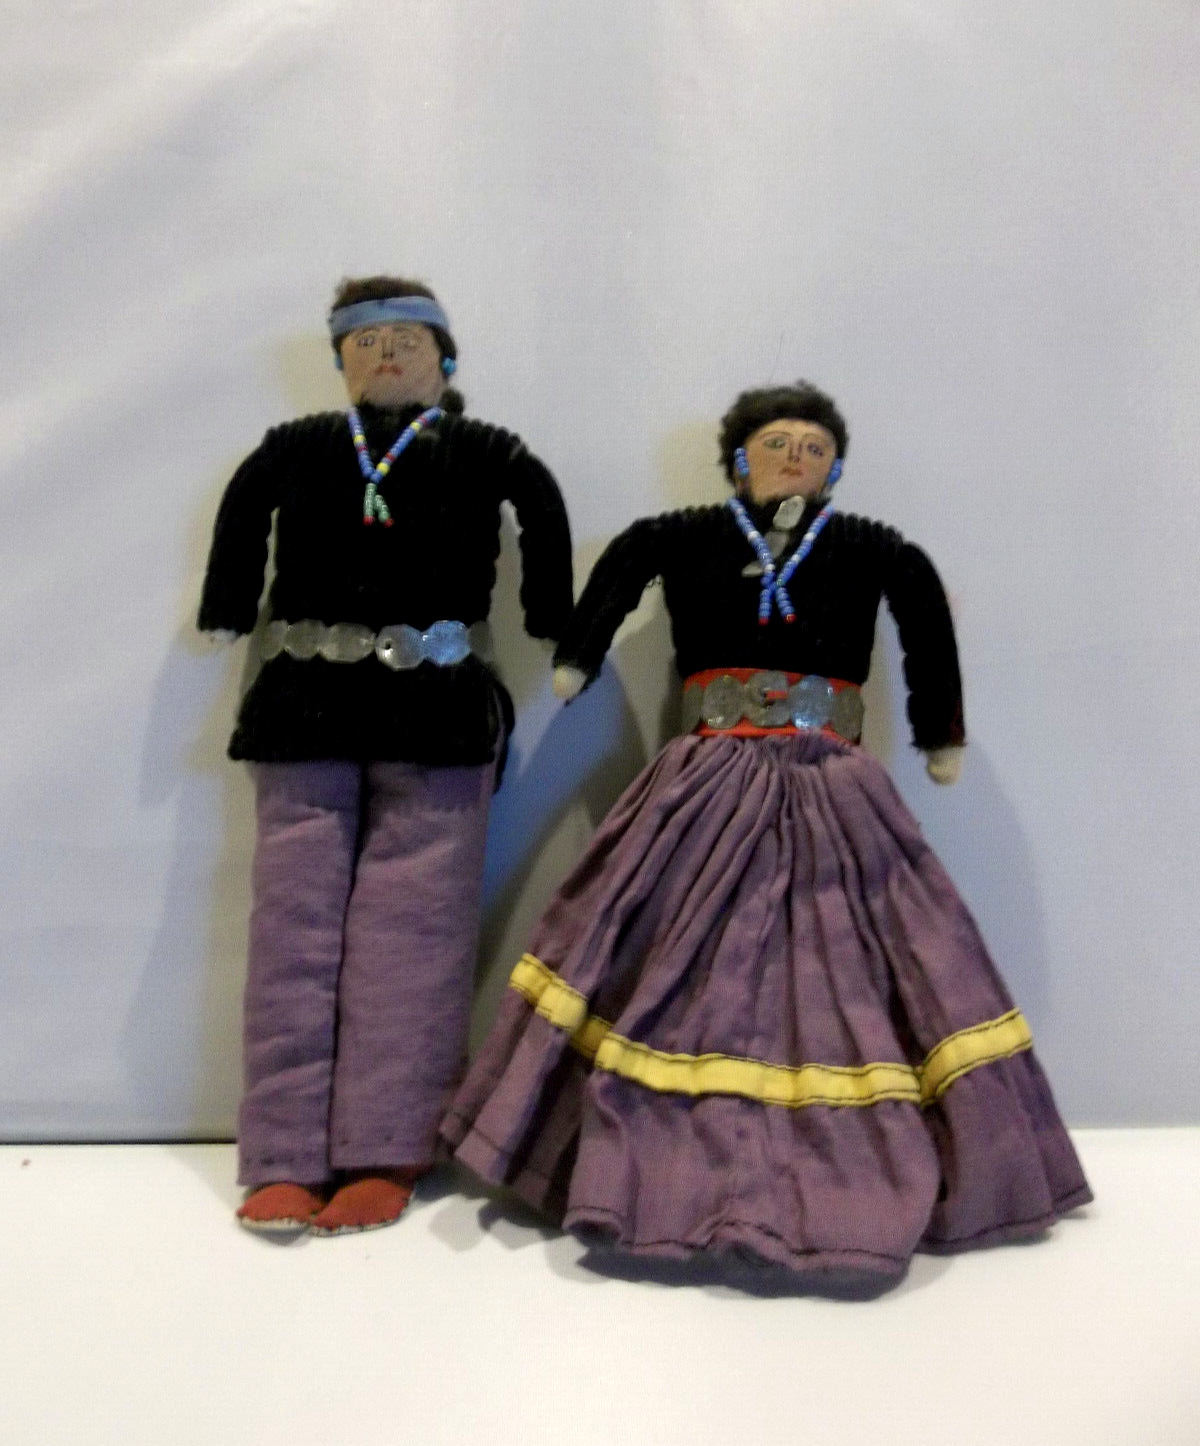 Vintage Native American Indian Navajo Cloth Beaded Jewelry Artist Dolls Lot of 2